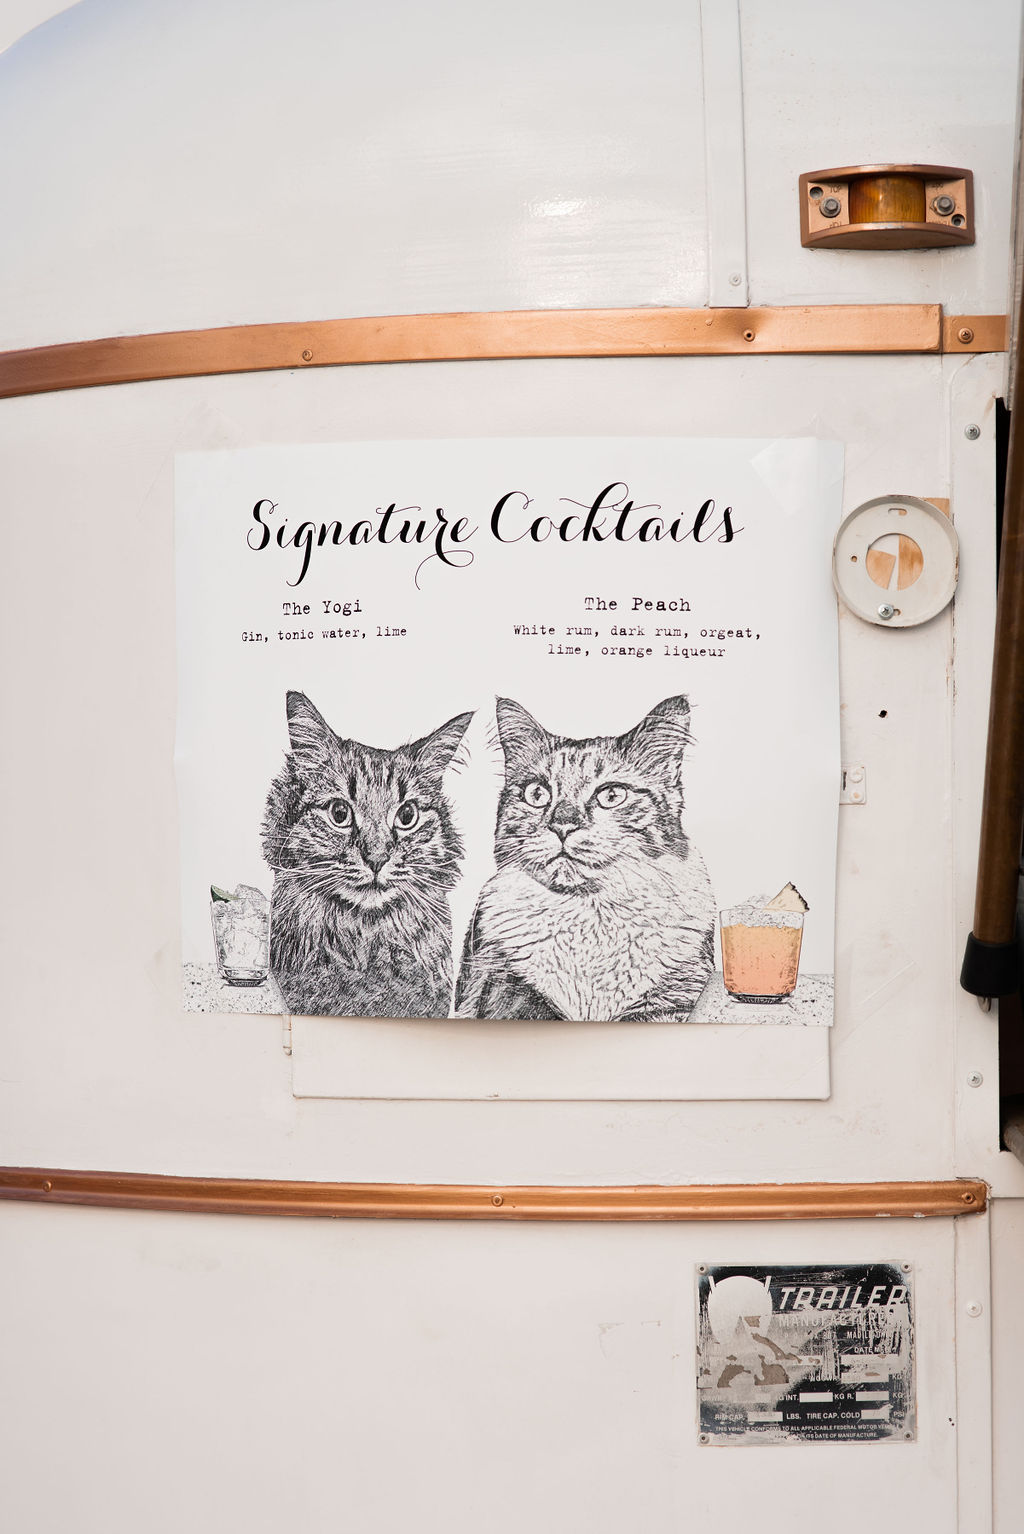 A poster featuring "signature cocktails" with illustrations of two cats, titled "the yogi" and "the peach," displayed on a white caravan wall.